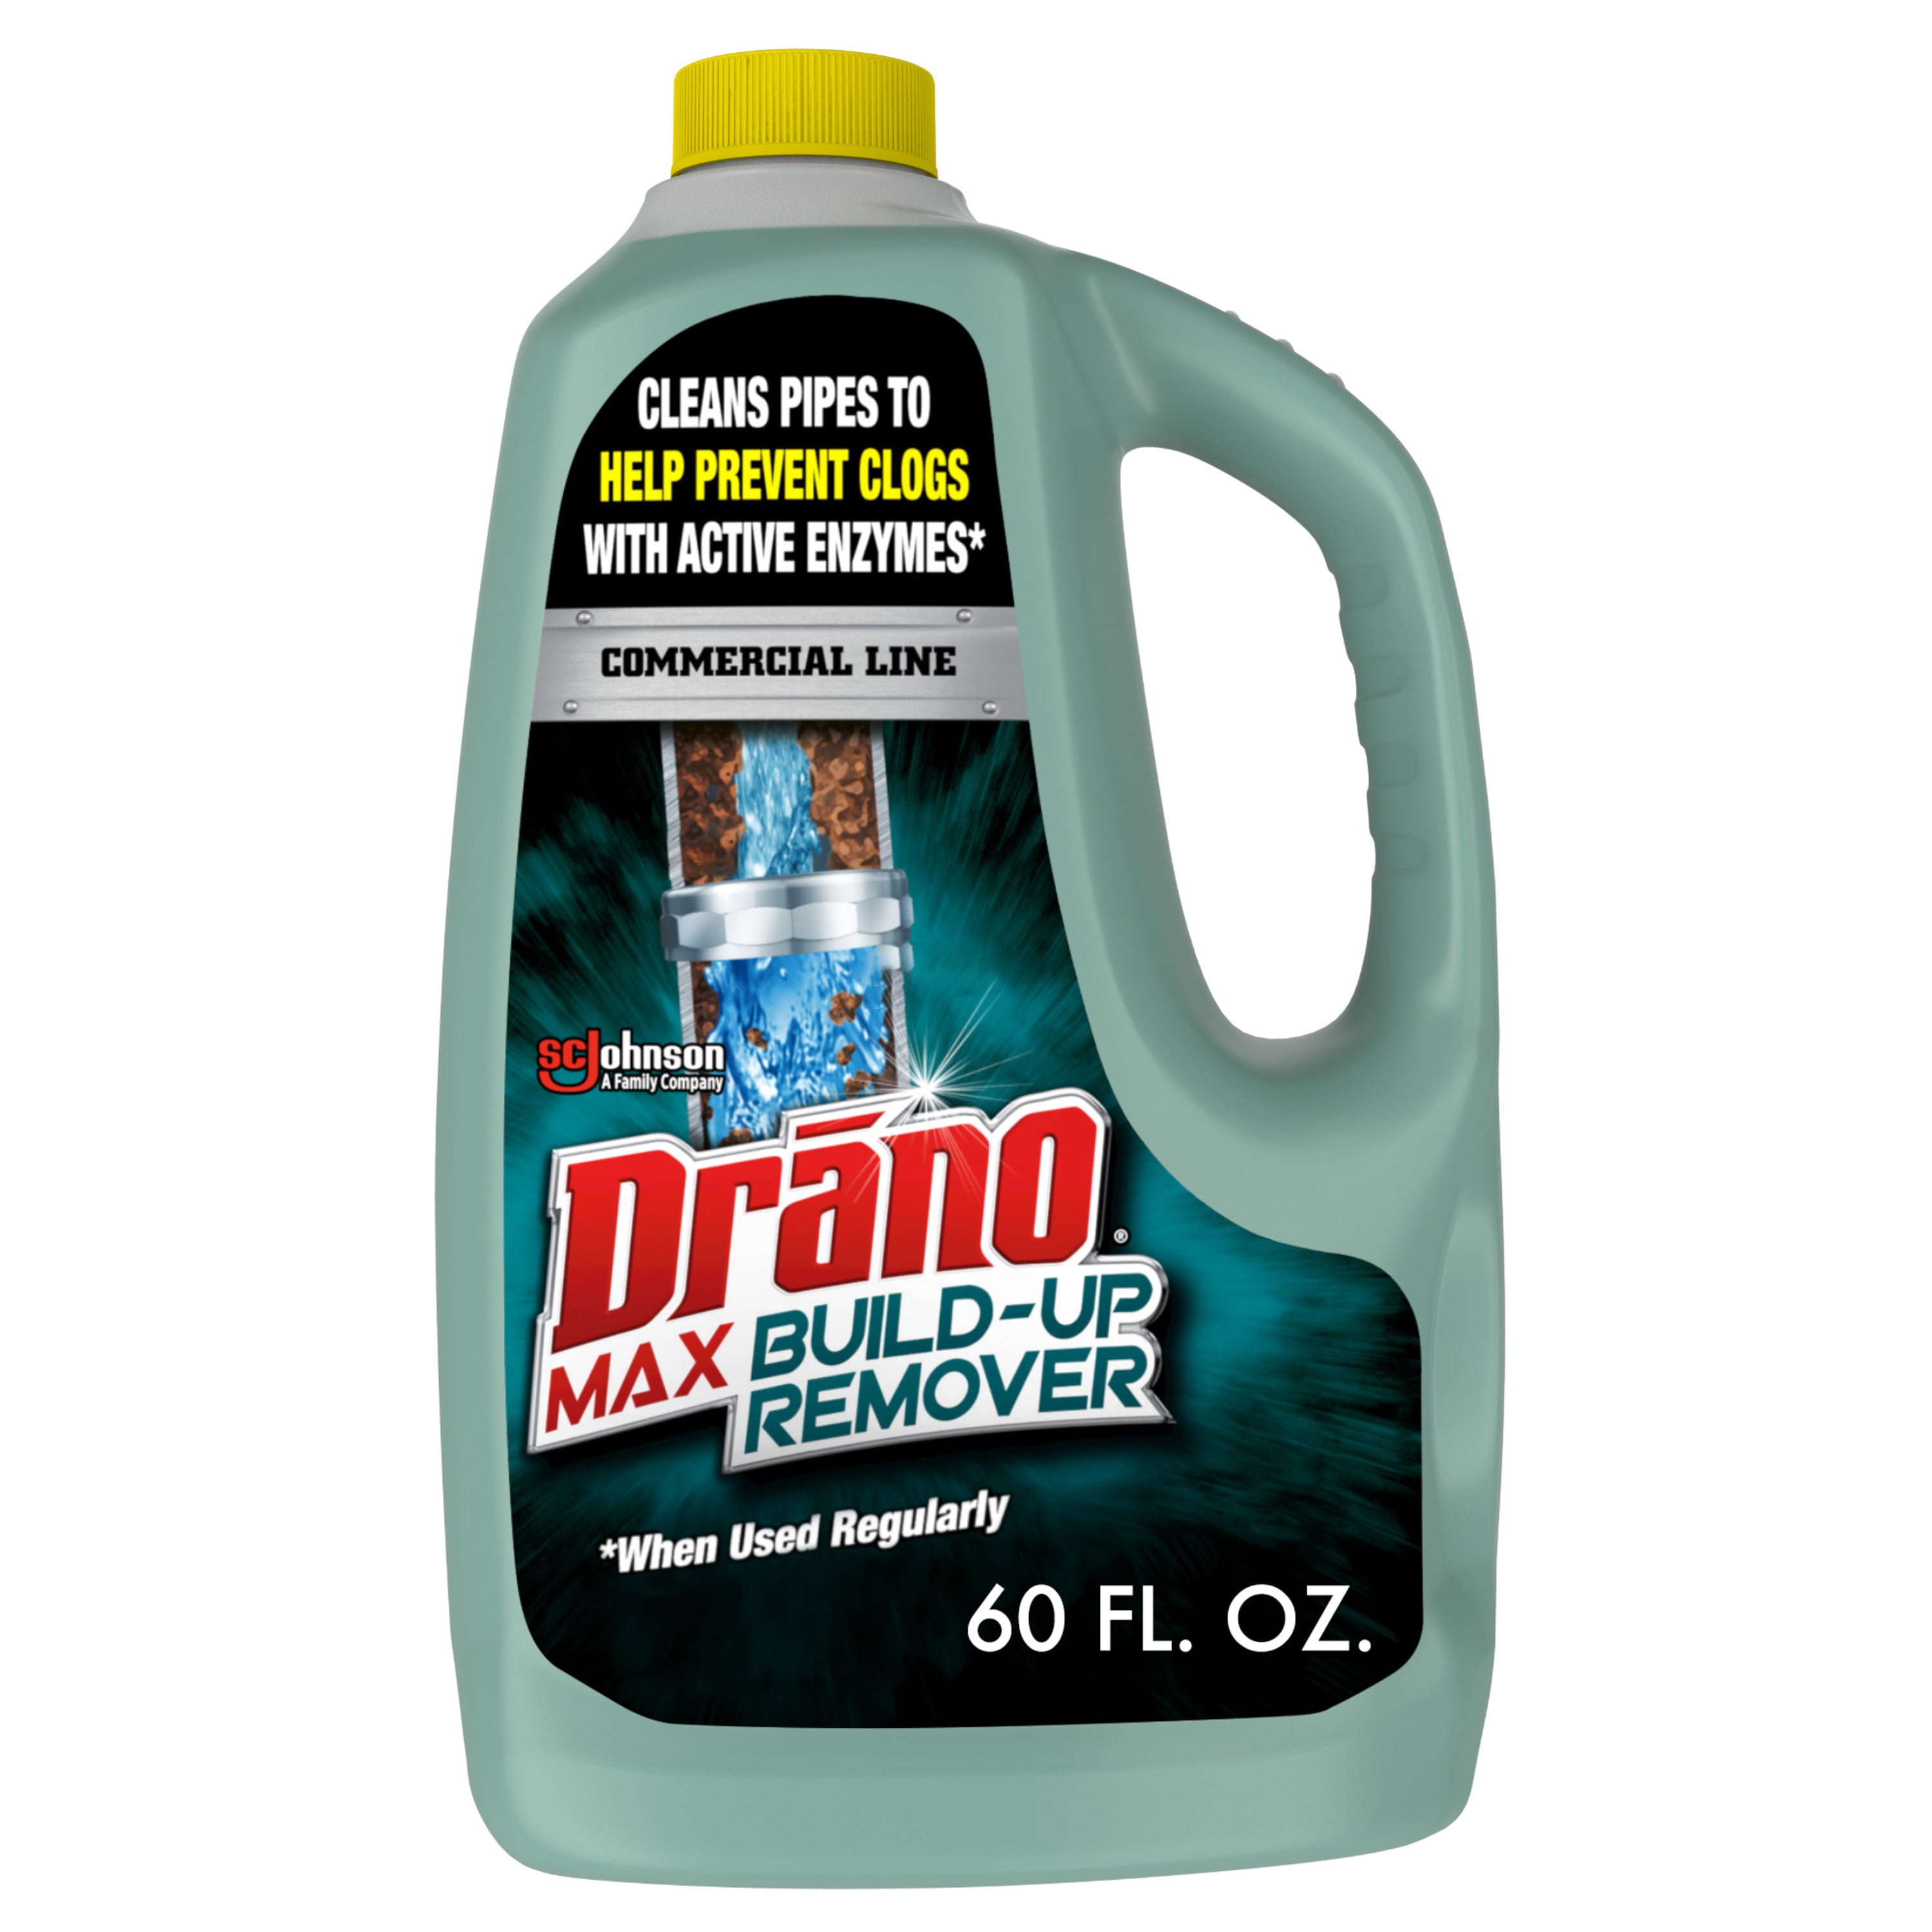 Drano Max Build-Up Remover, Commercial Line, 64 Oz